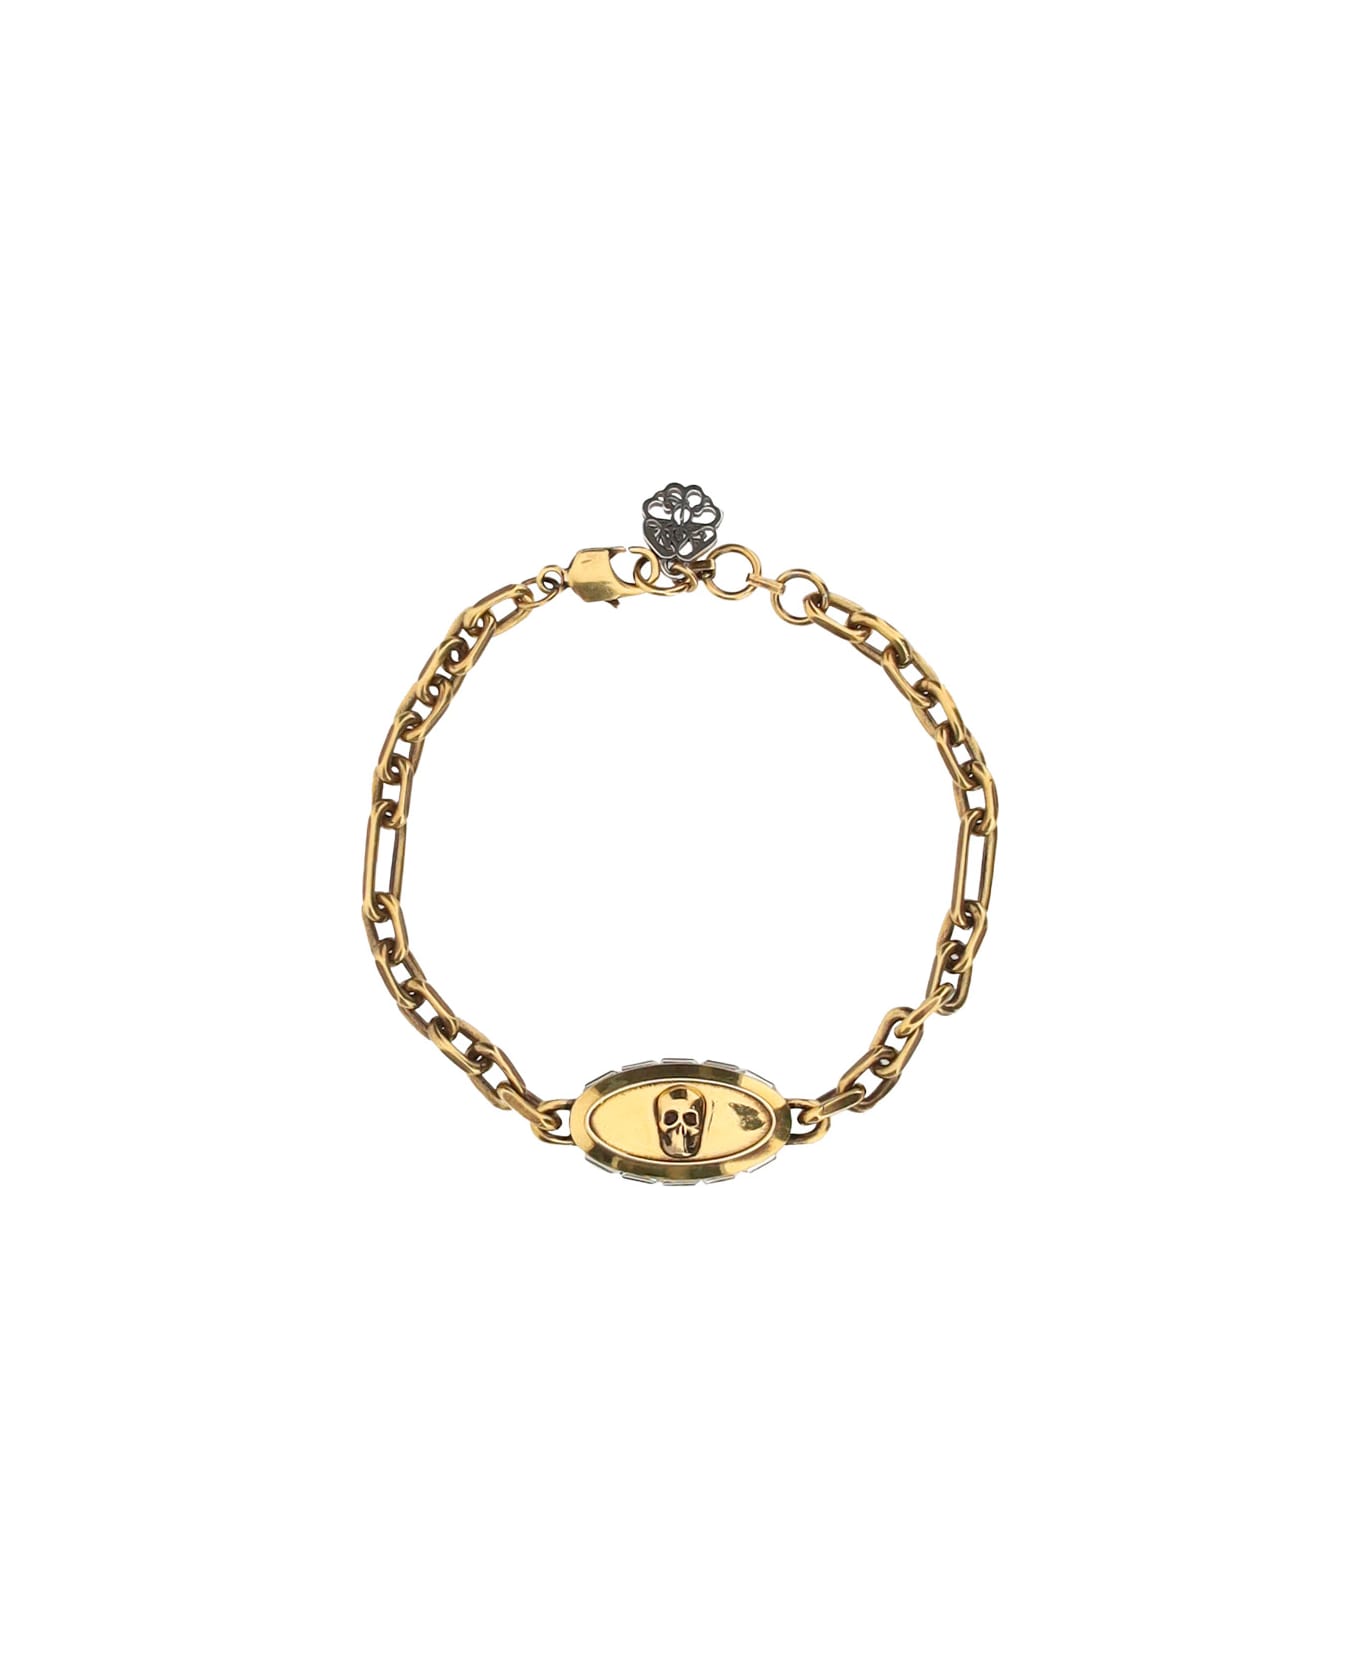 Alexander McQueen Chain Bracelet With Skull Detail And Logo Charm - 0446/0448/crystal ブレスレット